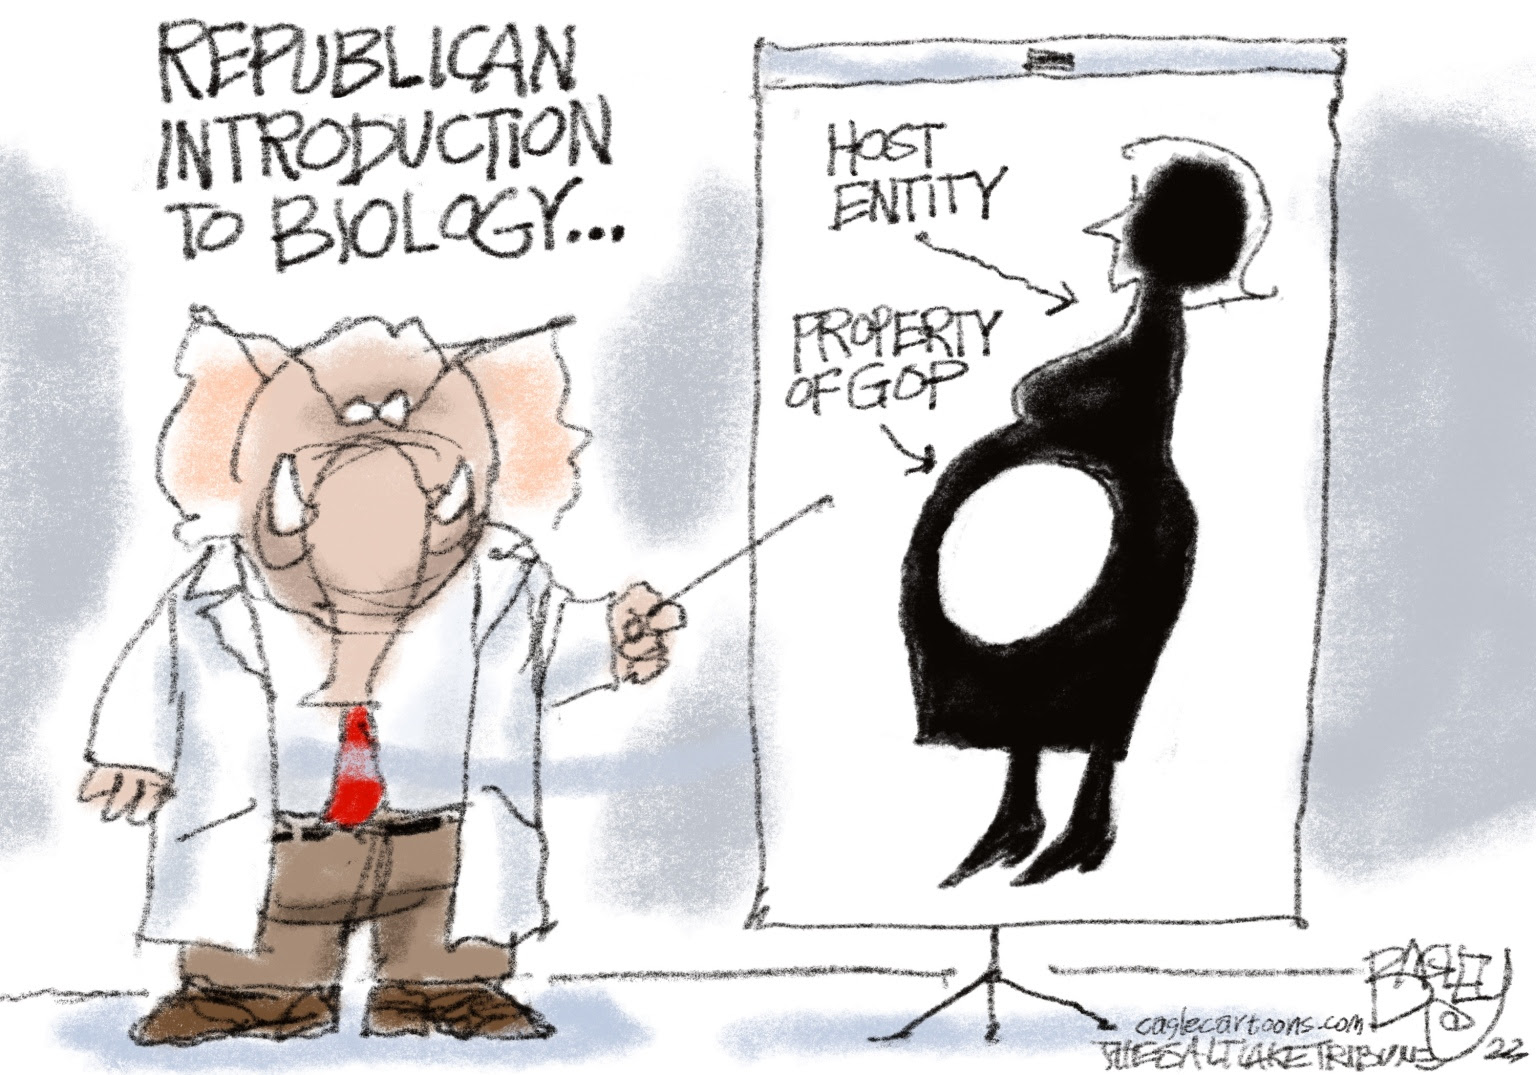 Republicans ban abortion and deny poor women Medicaid